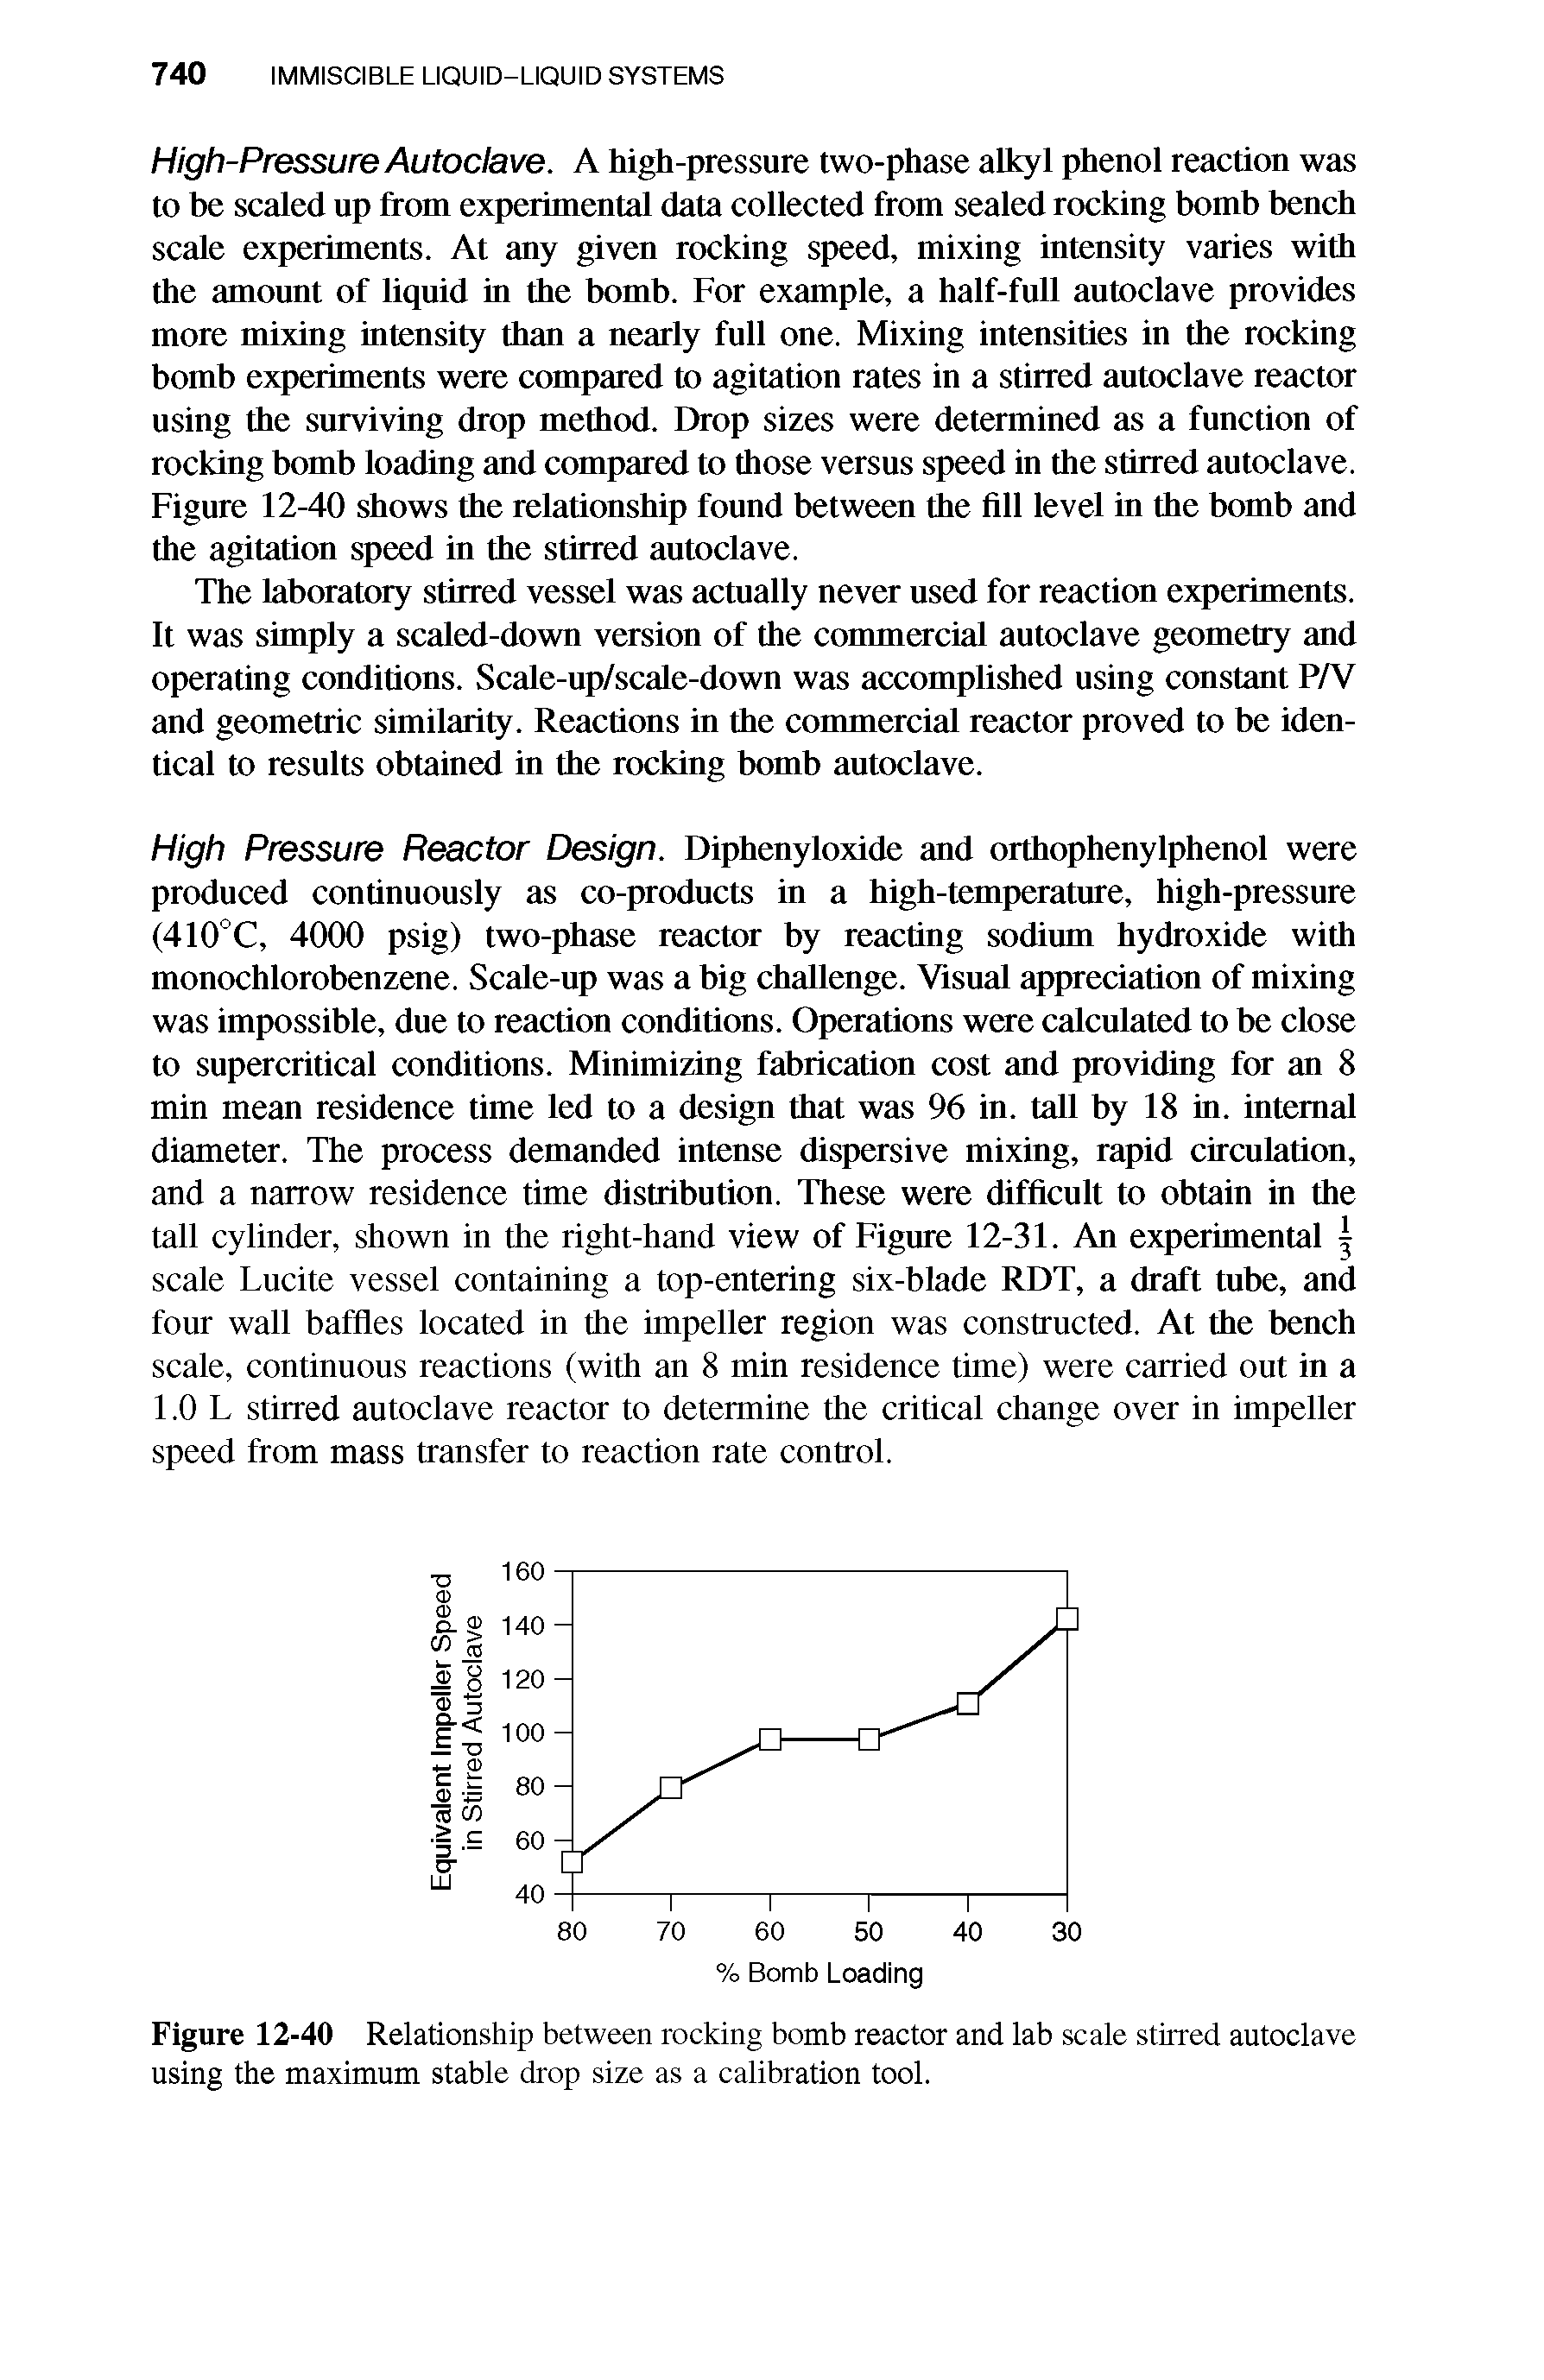 Figure 12-40 Relationship between rocking bomb reactor and lab scale stirred autoclave using the maximum stable drop size as a calibration tool.